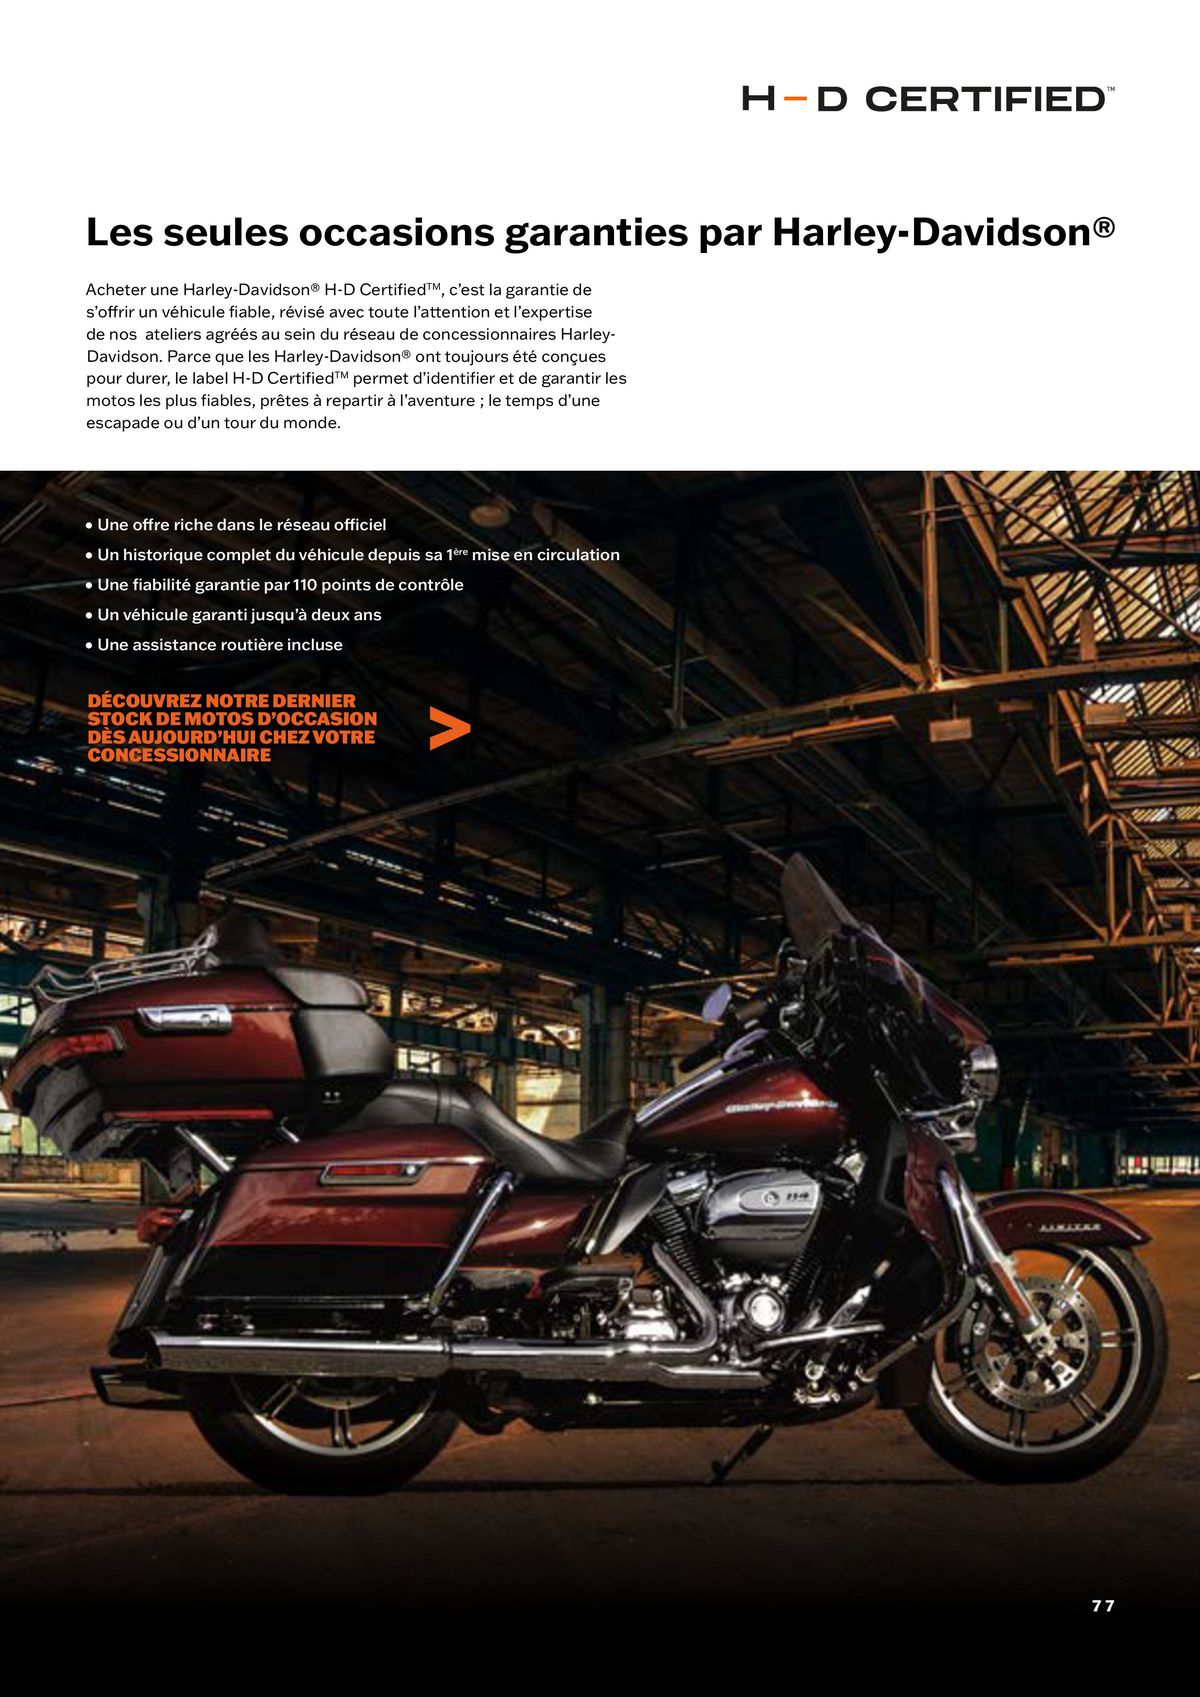 Catalogue Nouvelle Gamme Harley-Davidson, page 00077